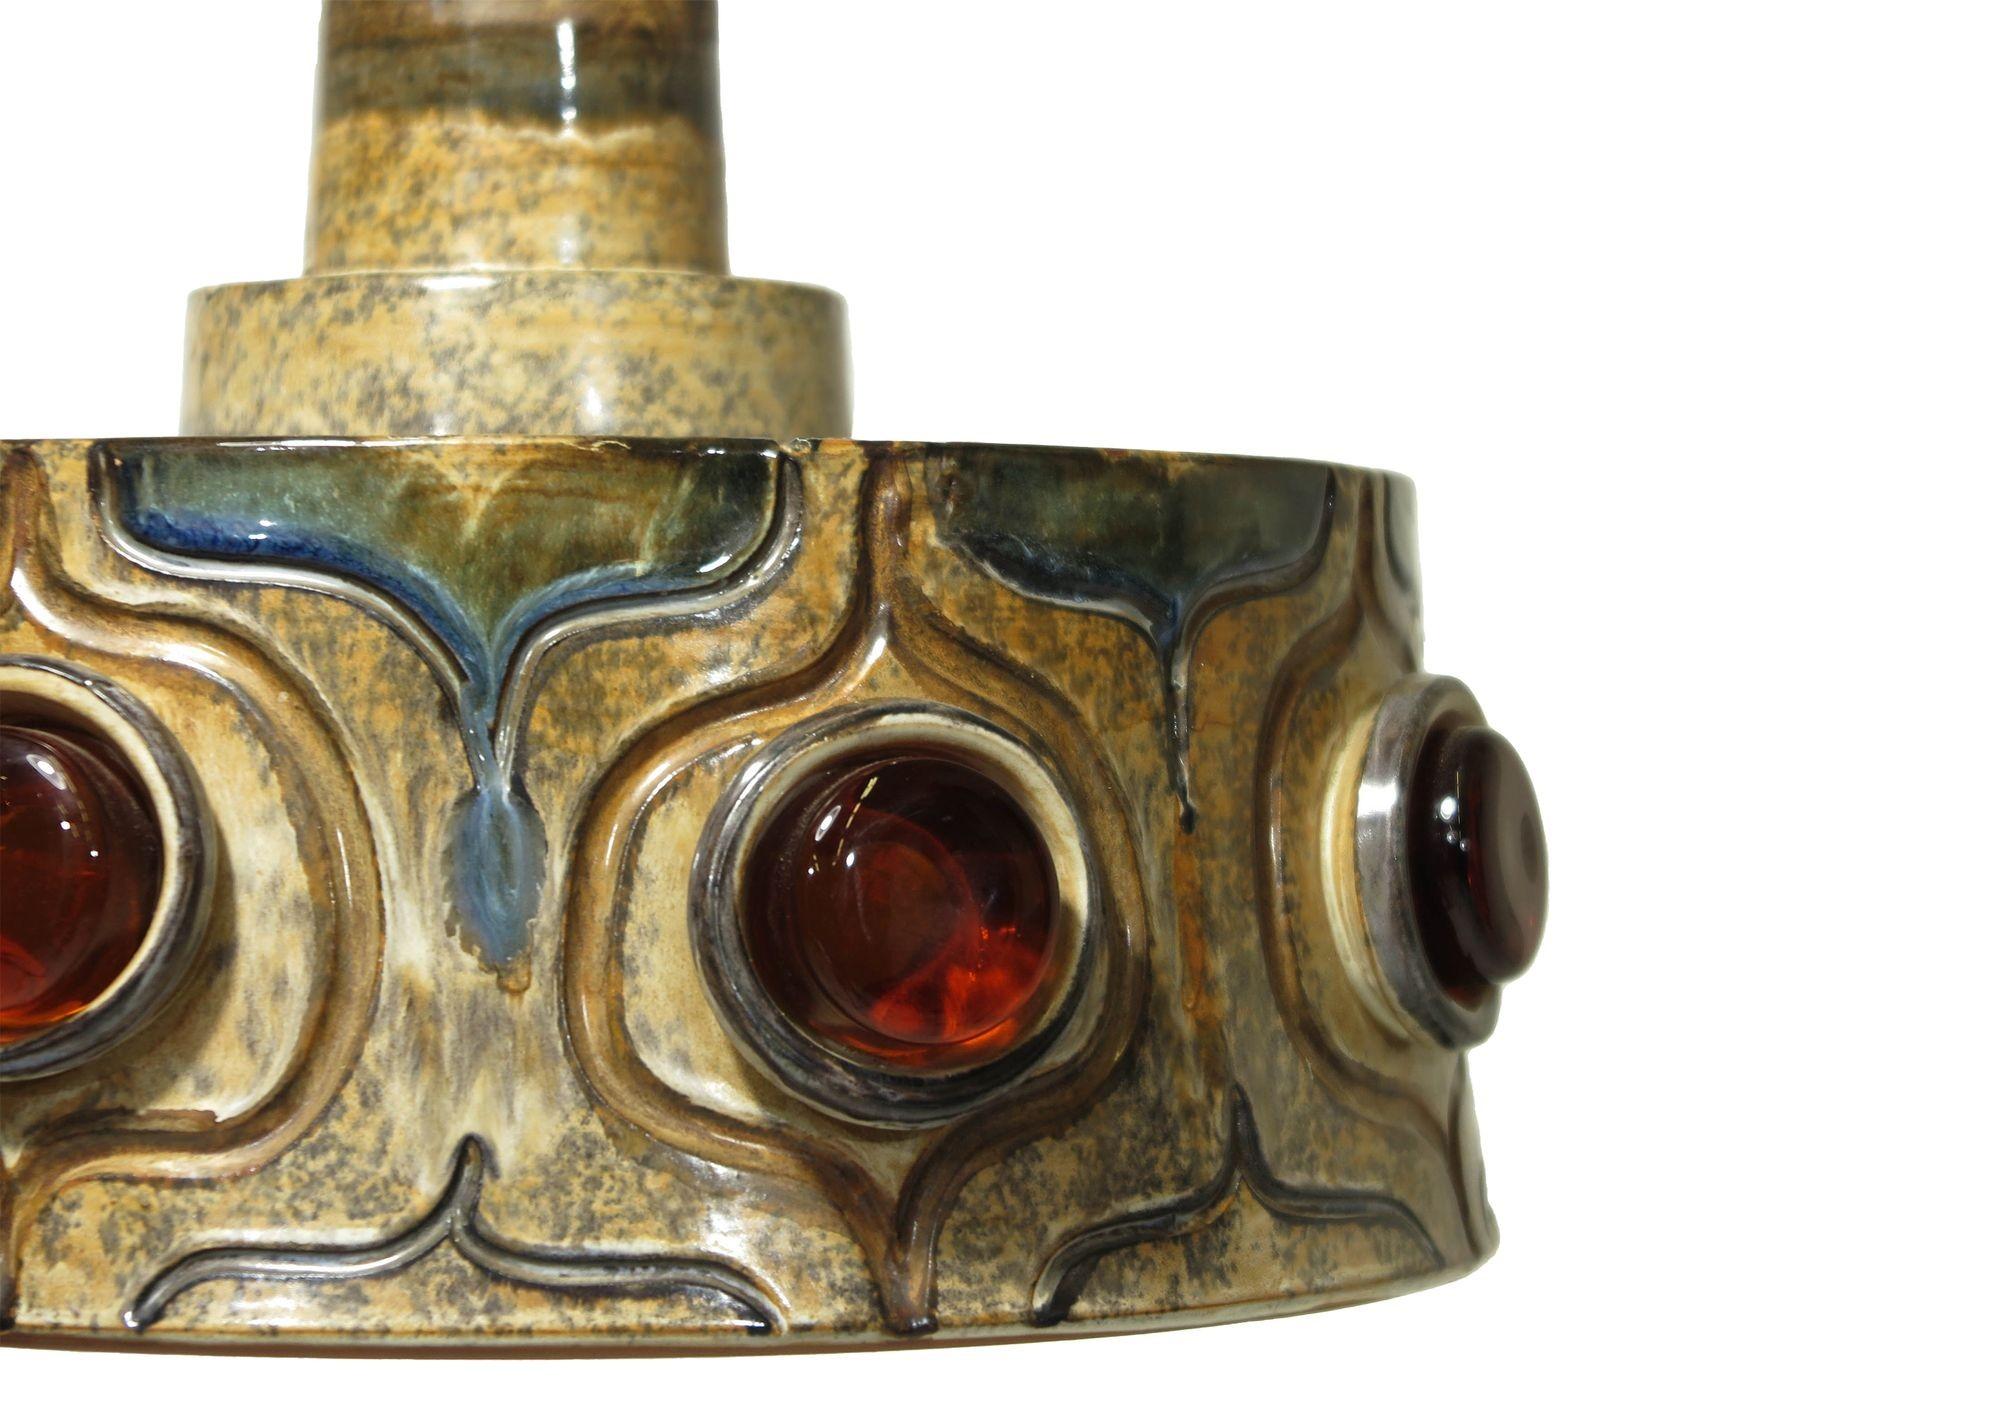 Danish pendent light by Jette Helleroe for Axella, features multi glazed ceramic with orange glass. Signed.
Measurements 13.75 x 8.75